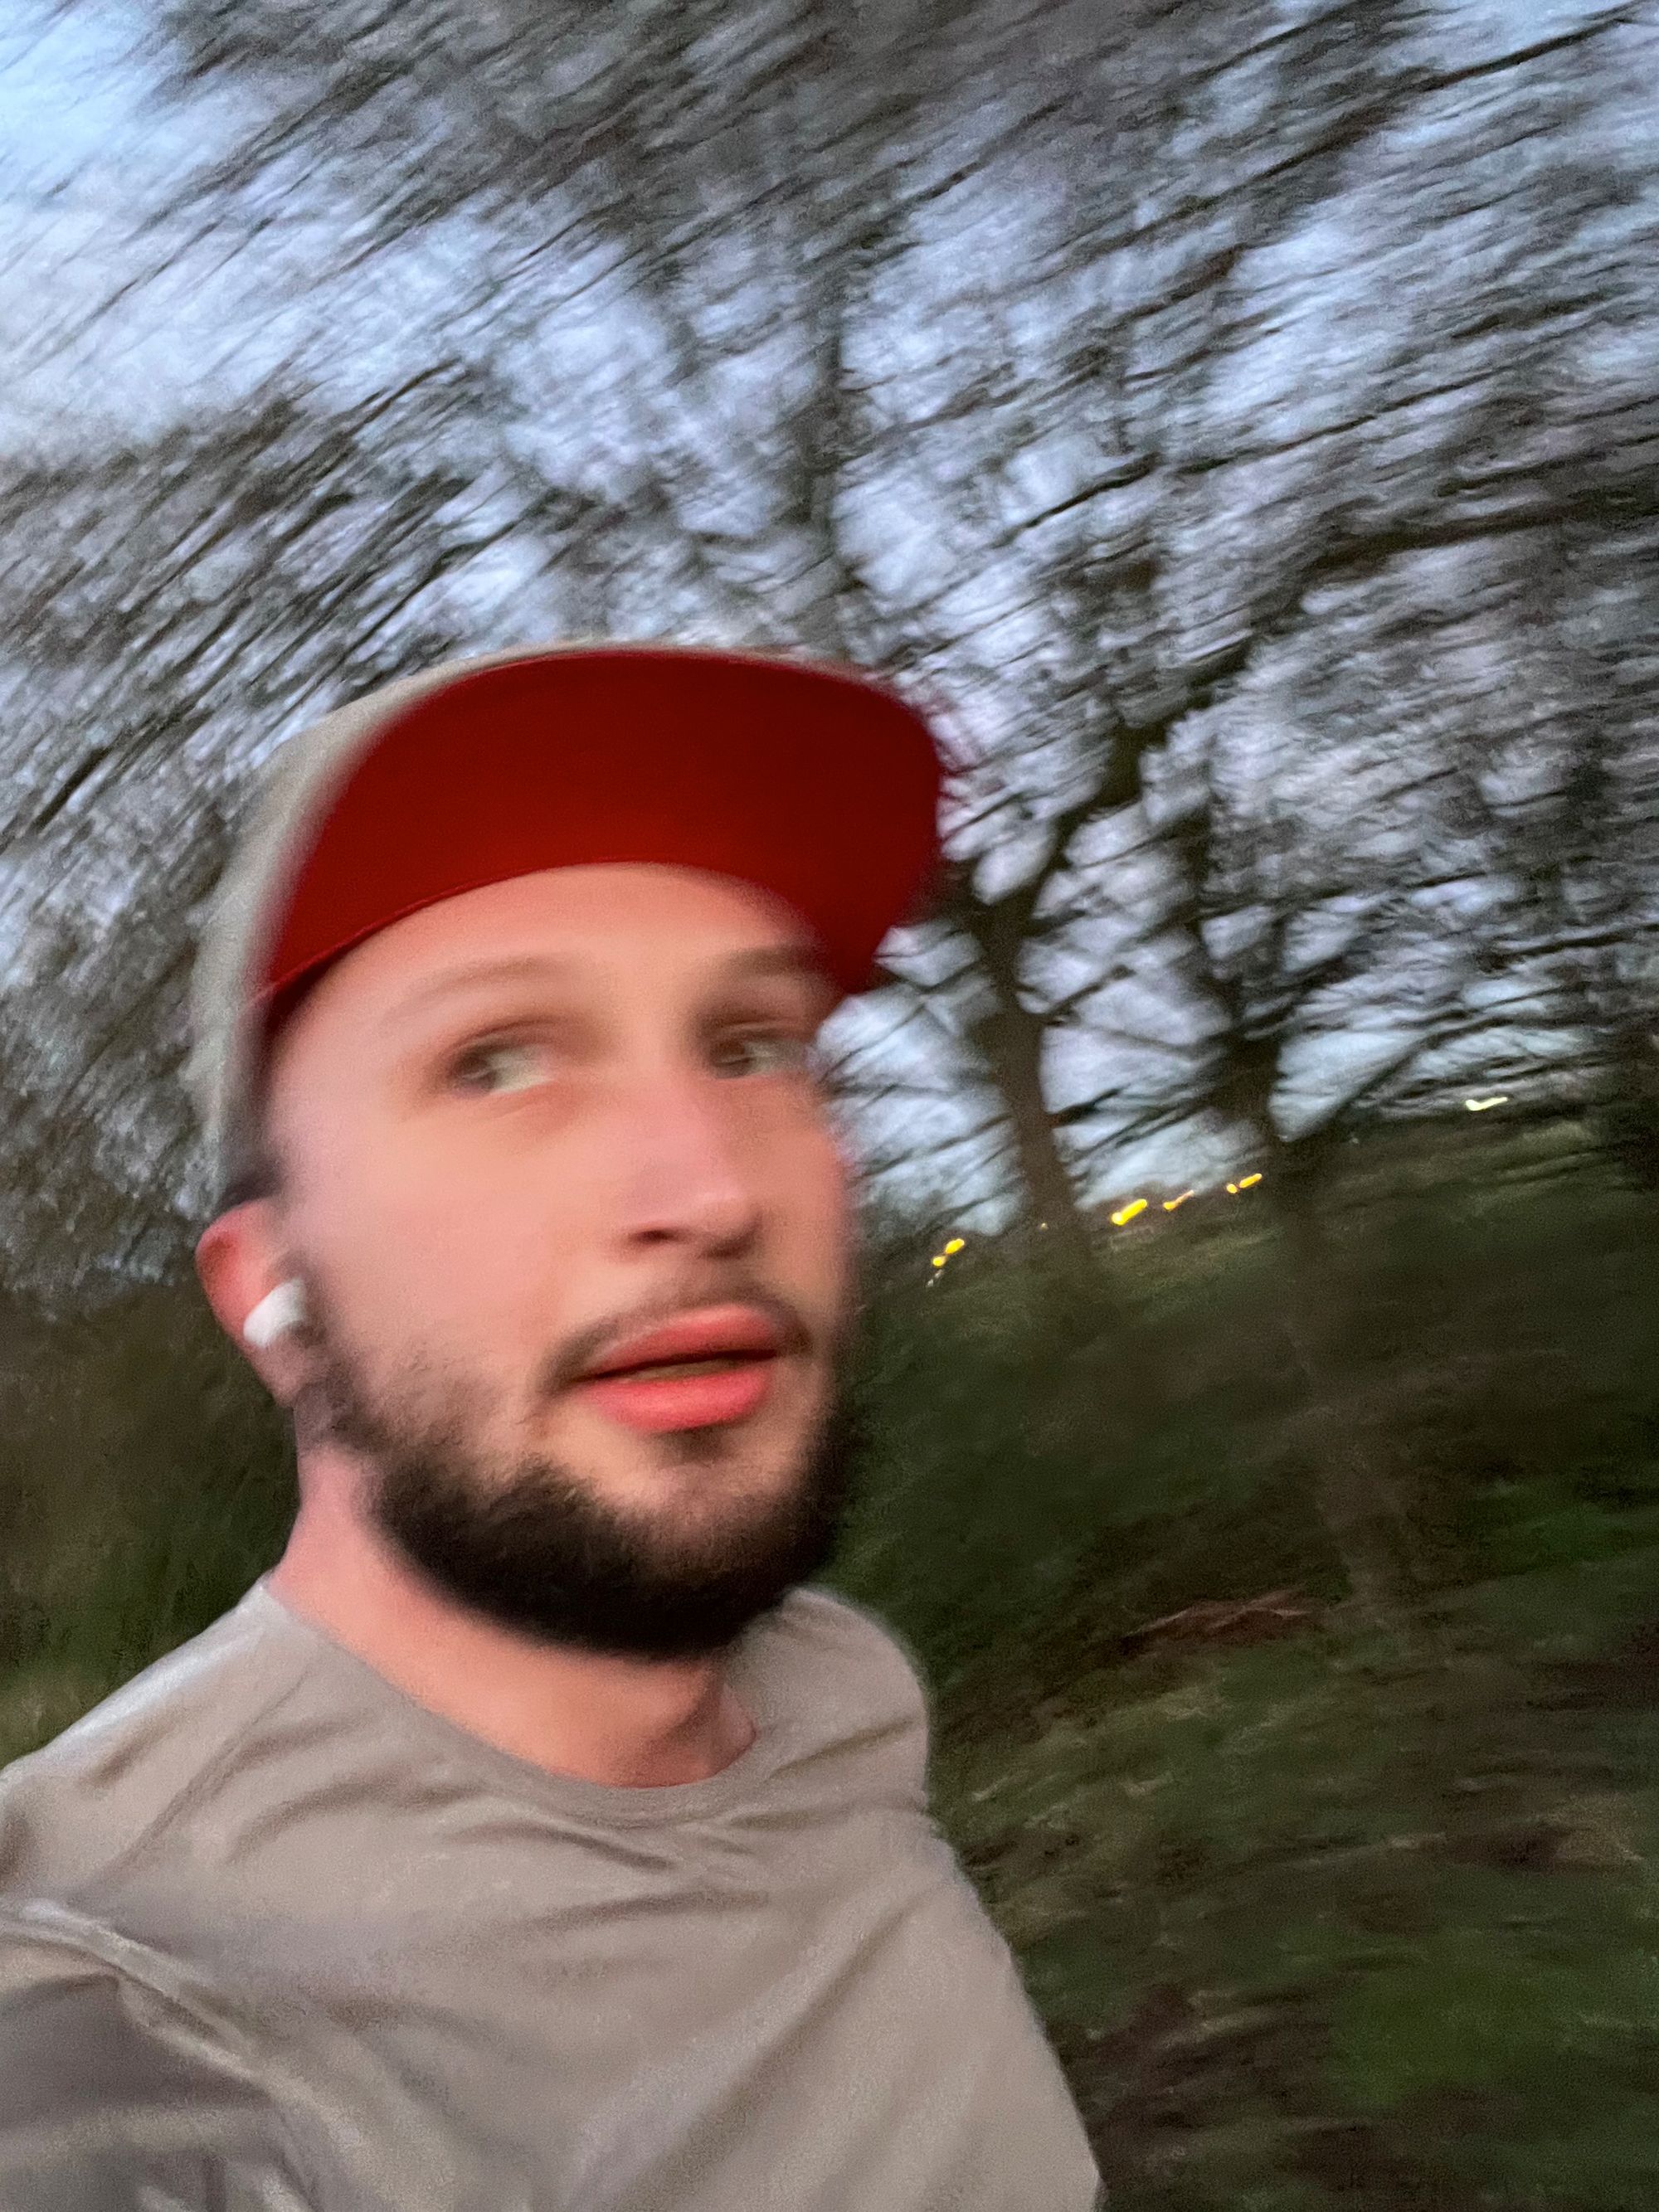 Jonathan running wearing a cap and a grey t-shirt, dusky, looking in the middle distance past the camera